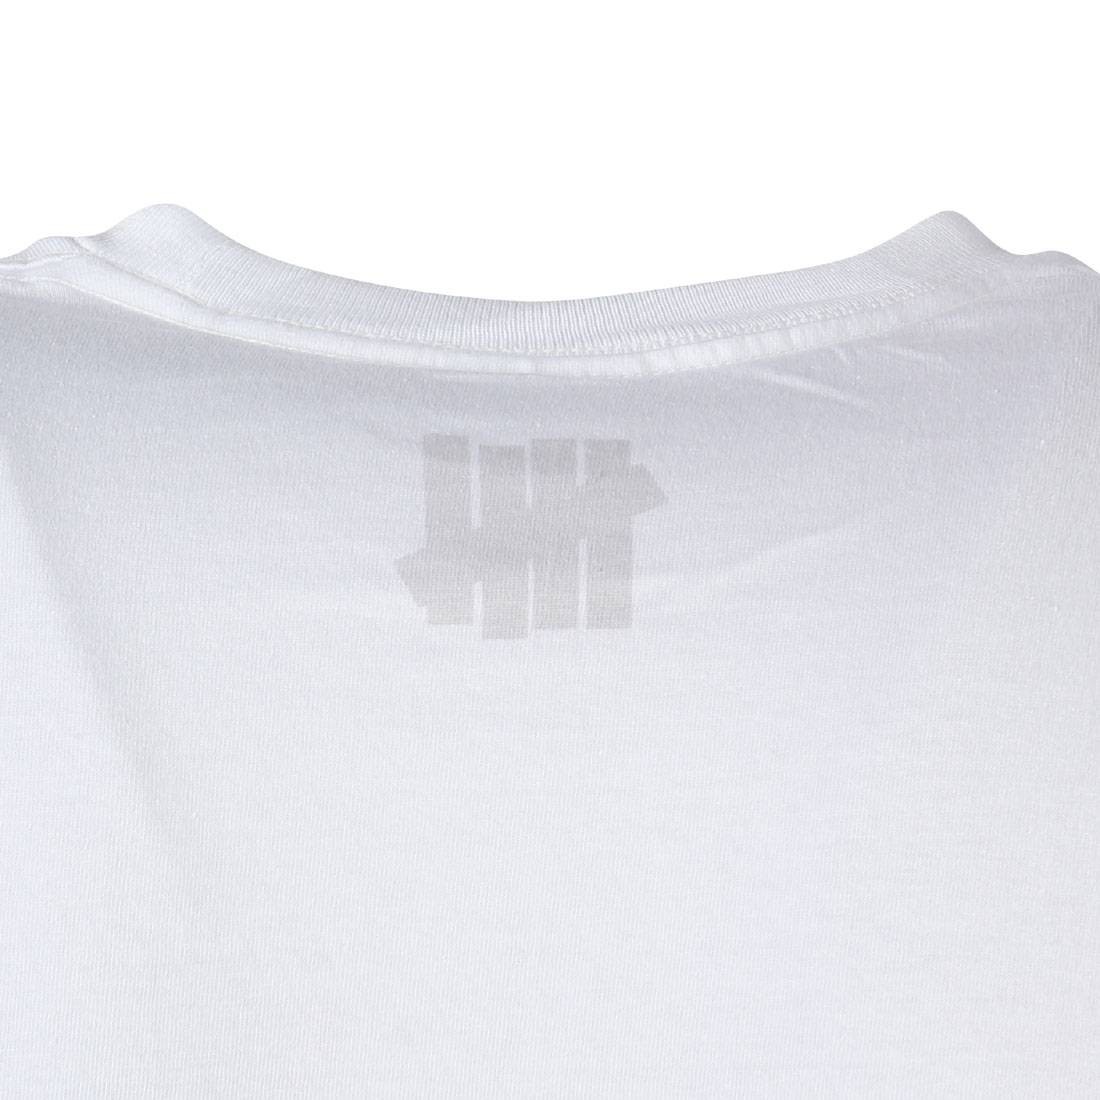 Undefeated Men Rational Tee white